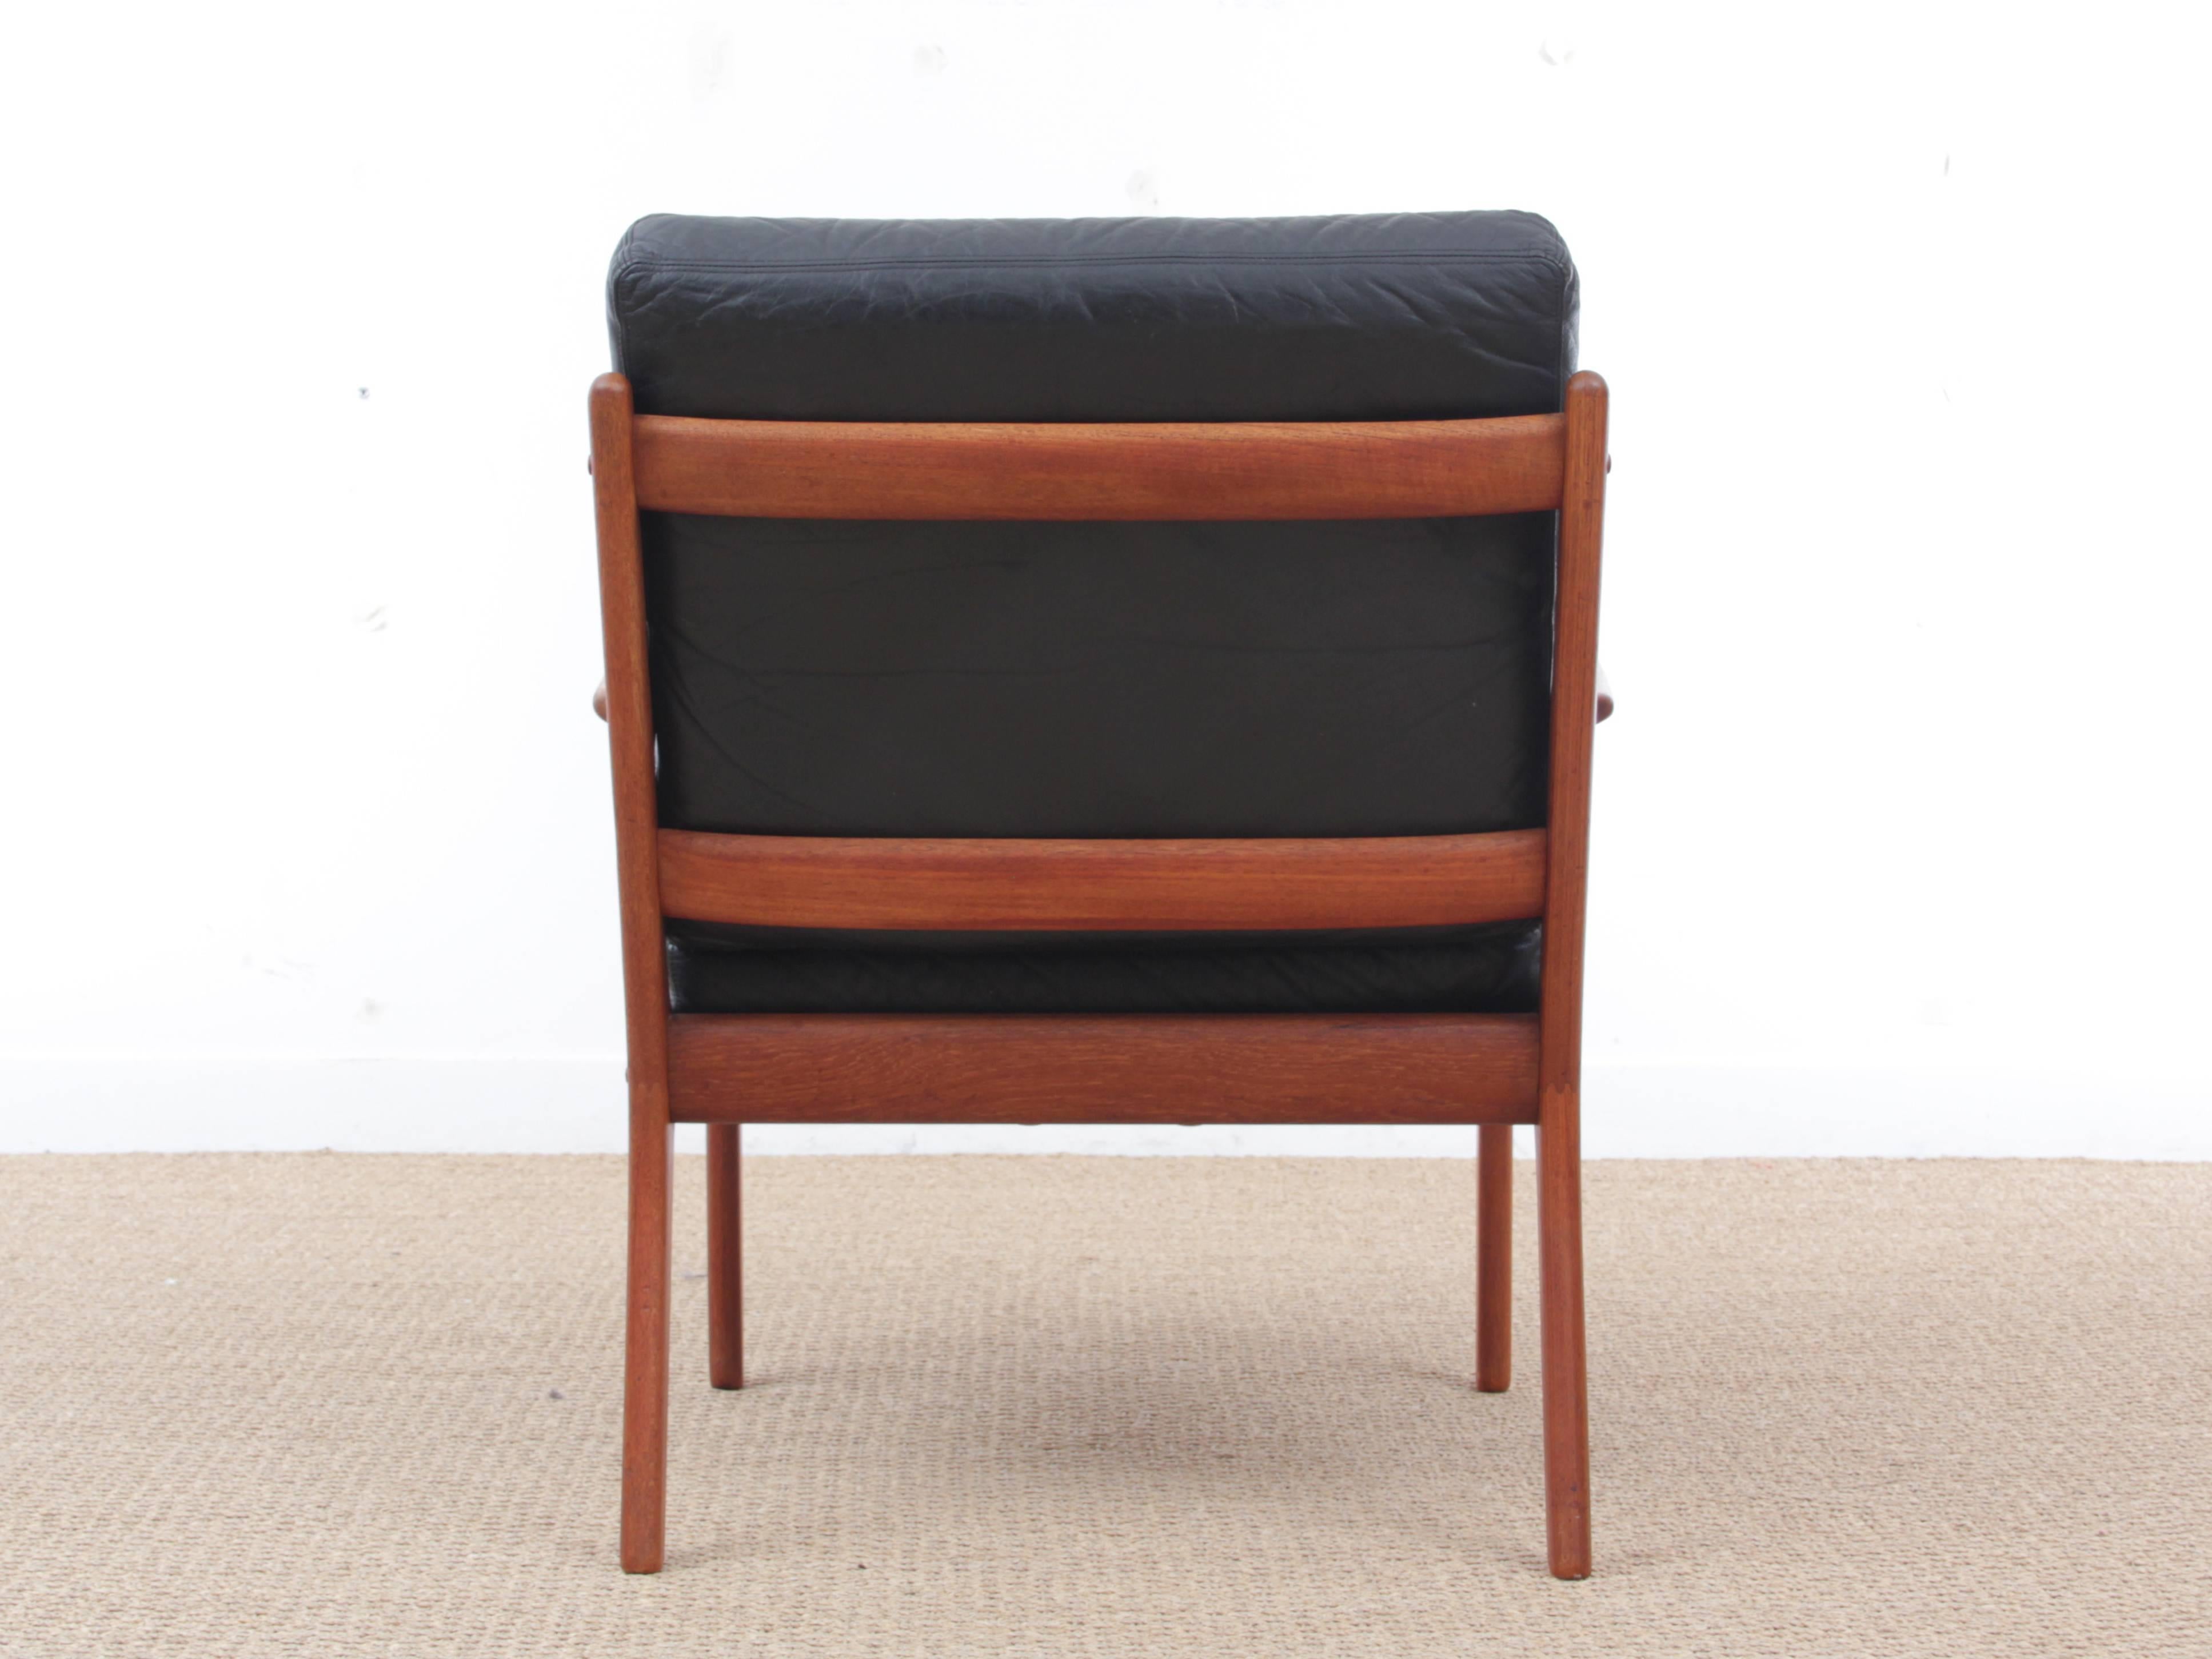 Danish Mid-Century Modern Pair of Armchairs by Ole Wanscher for Paul Jepesen 1